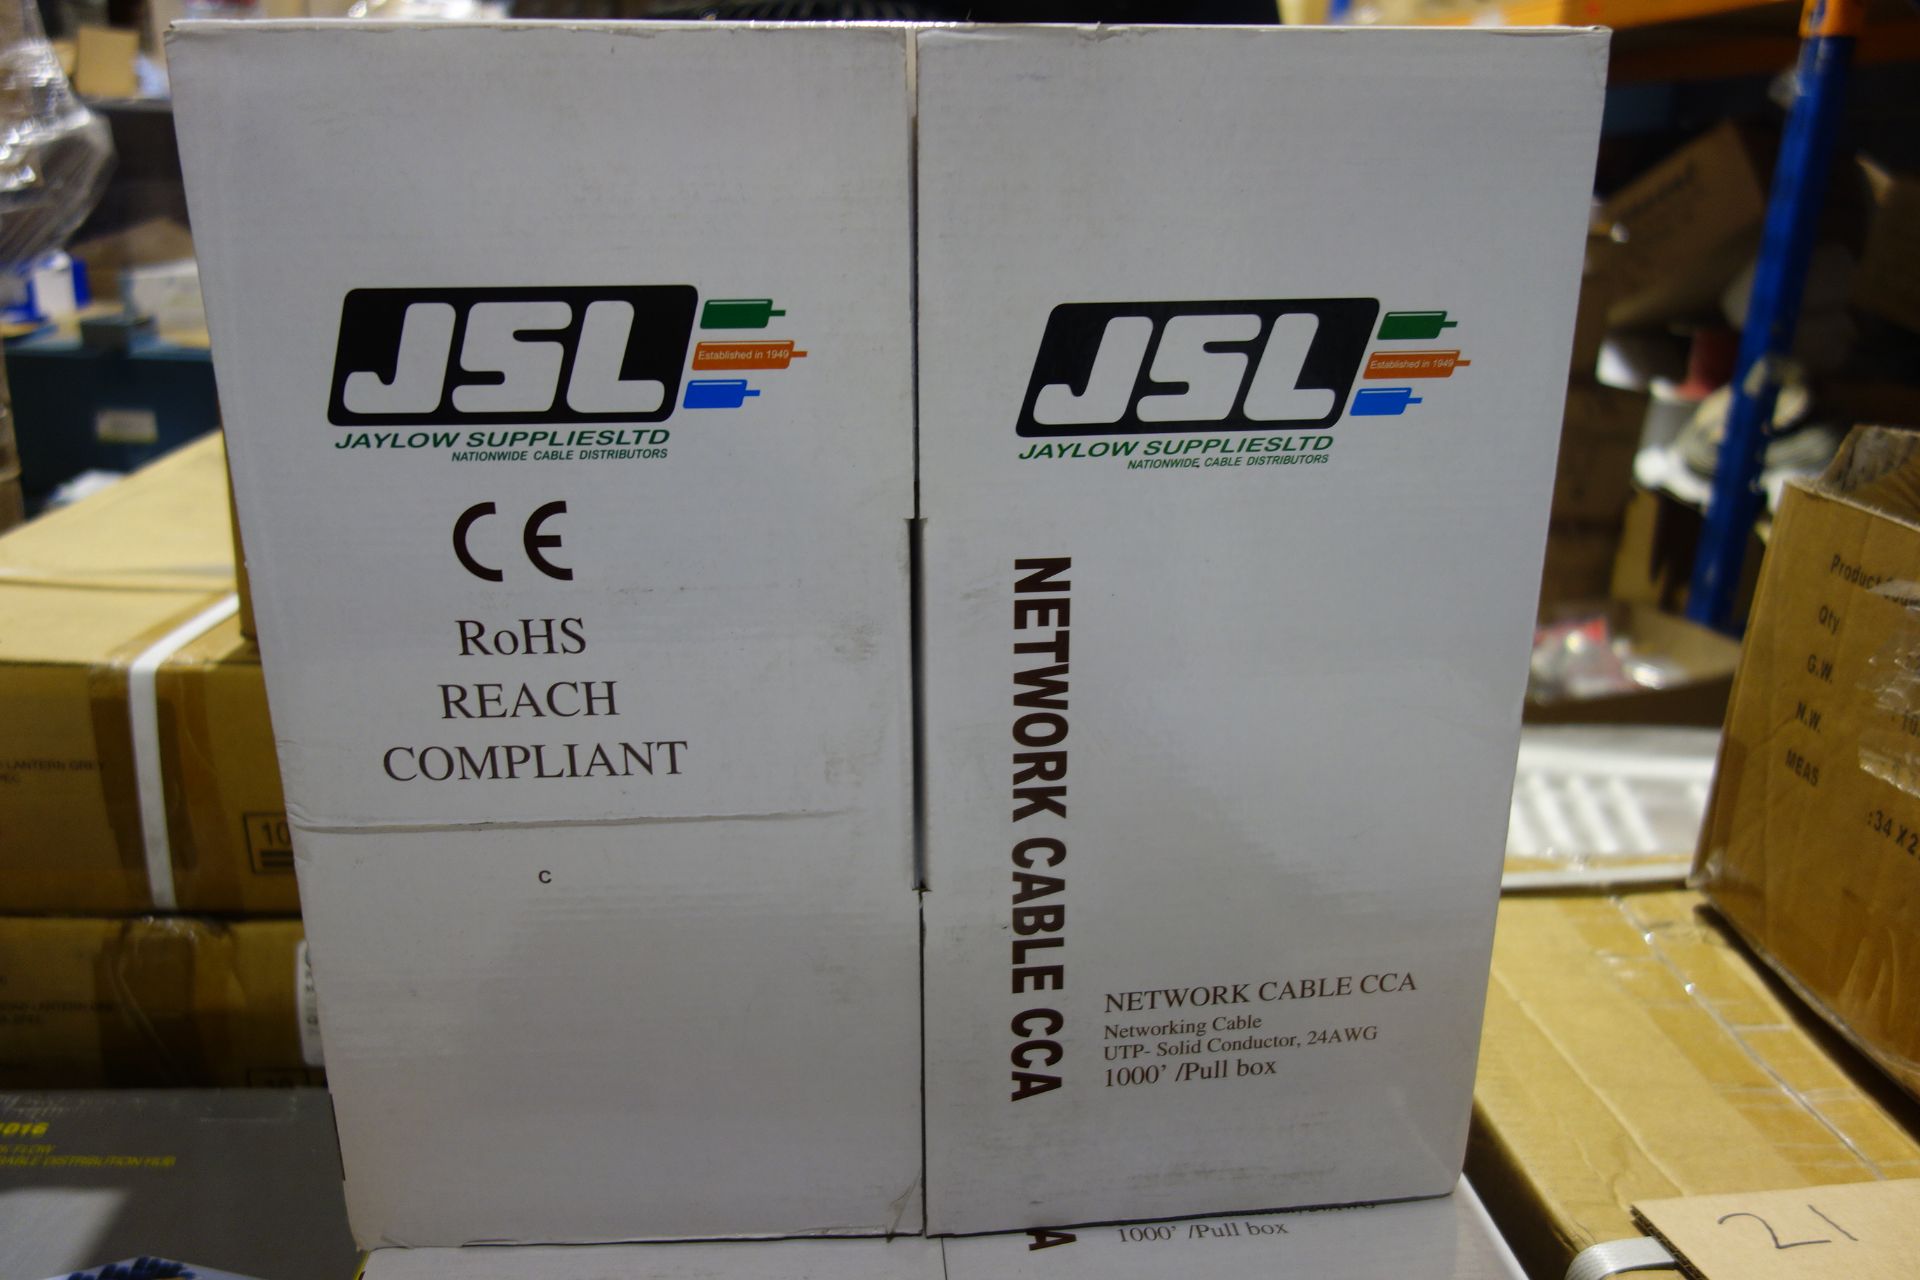 4 X JSL Pull Boxes Of UTP Network Cable CCA PVC Solid Conductor 24AWG